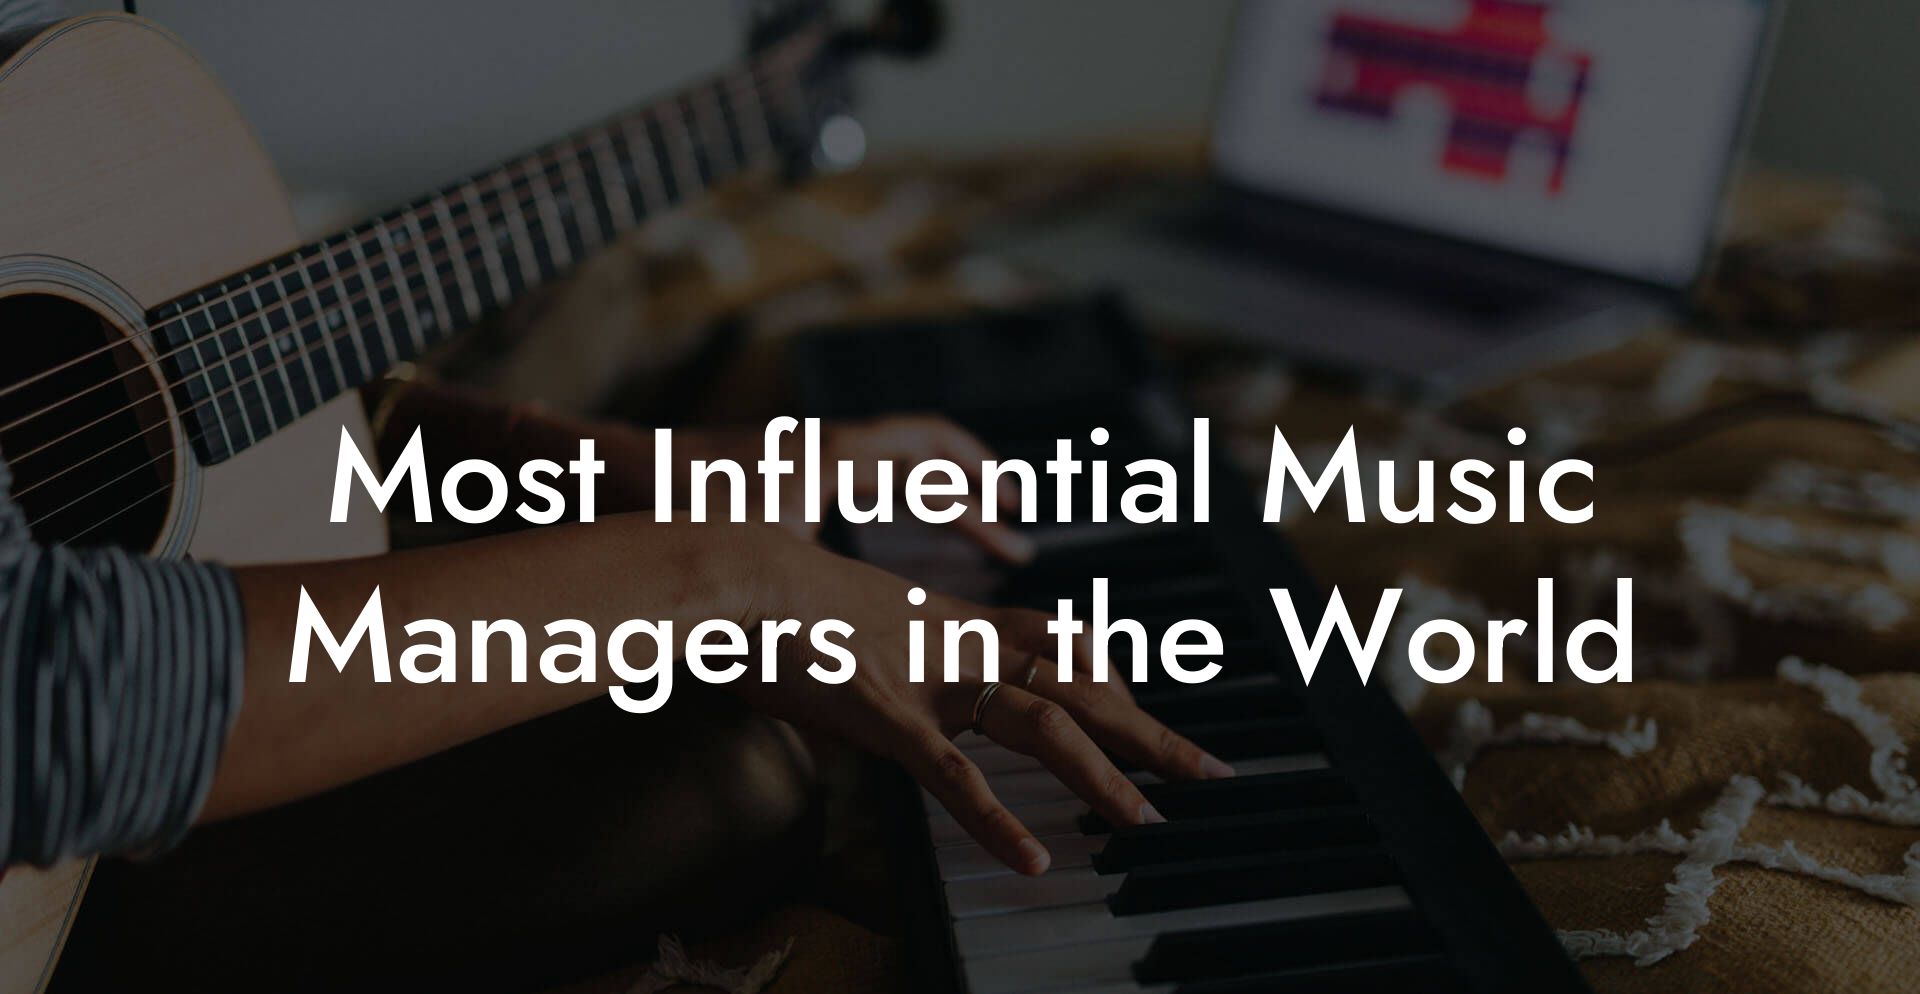 Most Influential Music Managers in the World